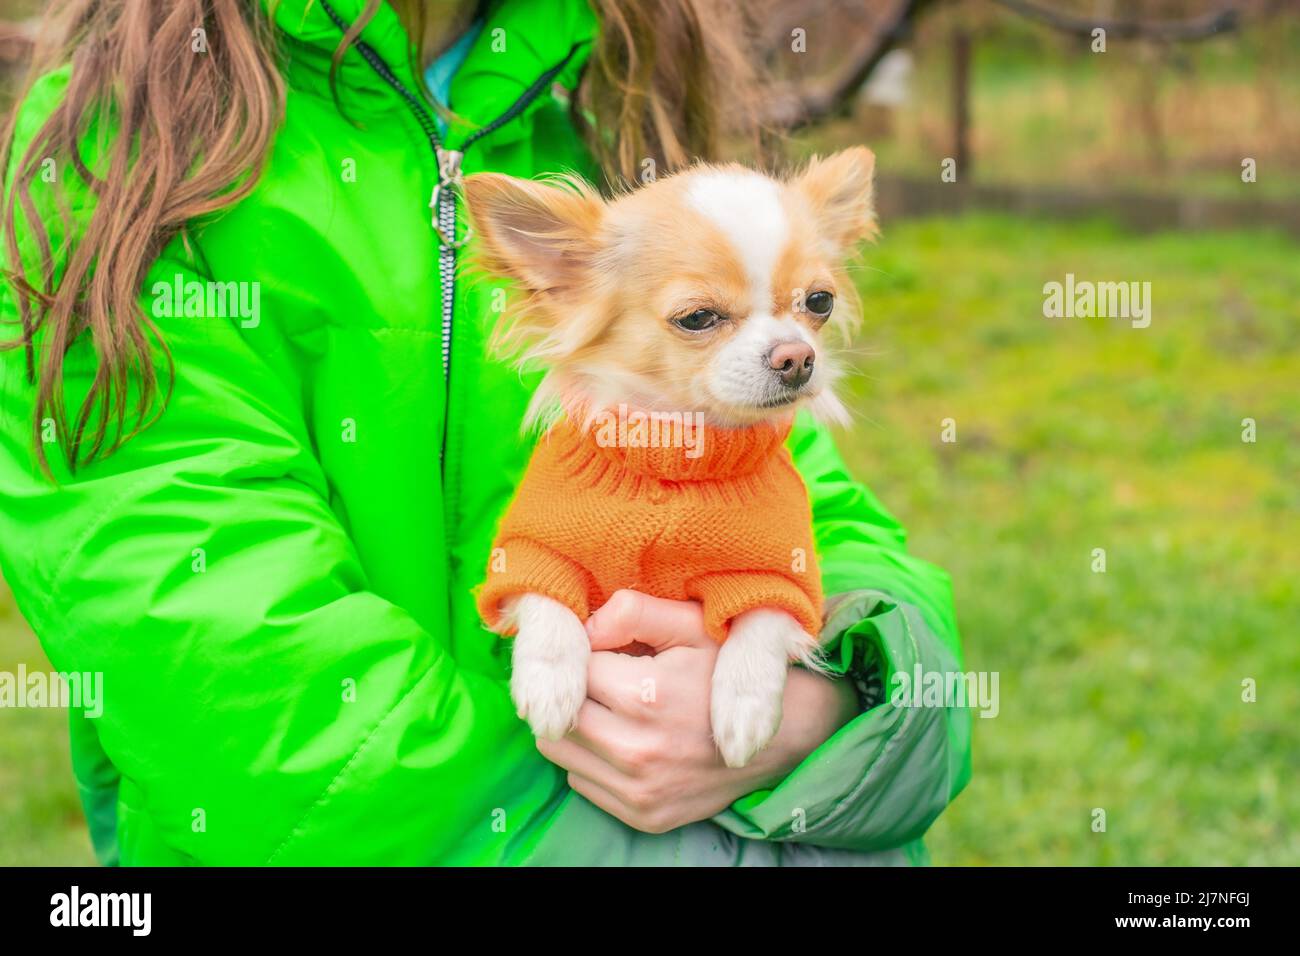 Chihuahua dog in an orange sweater in the arms of a girl in a green ...